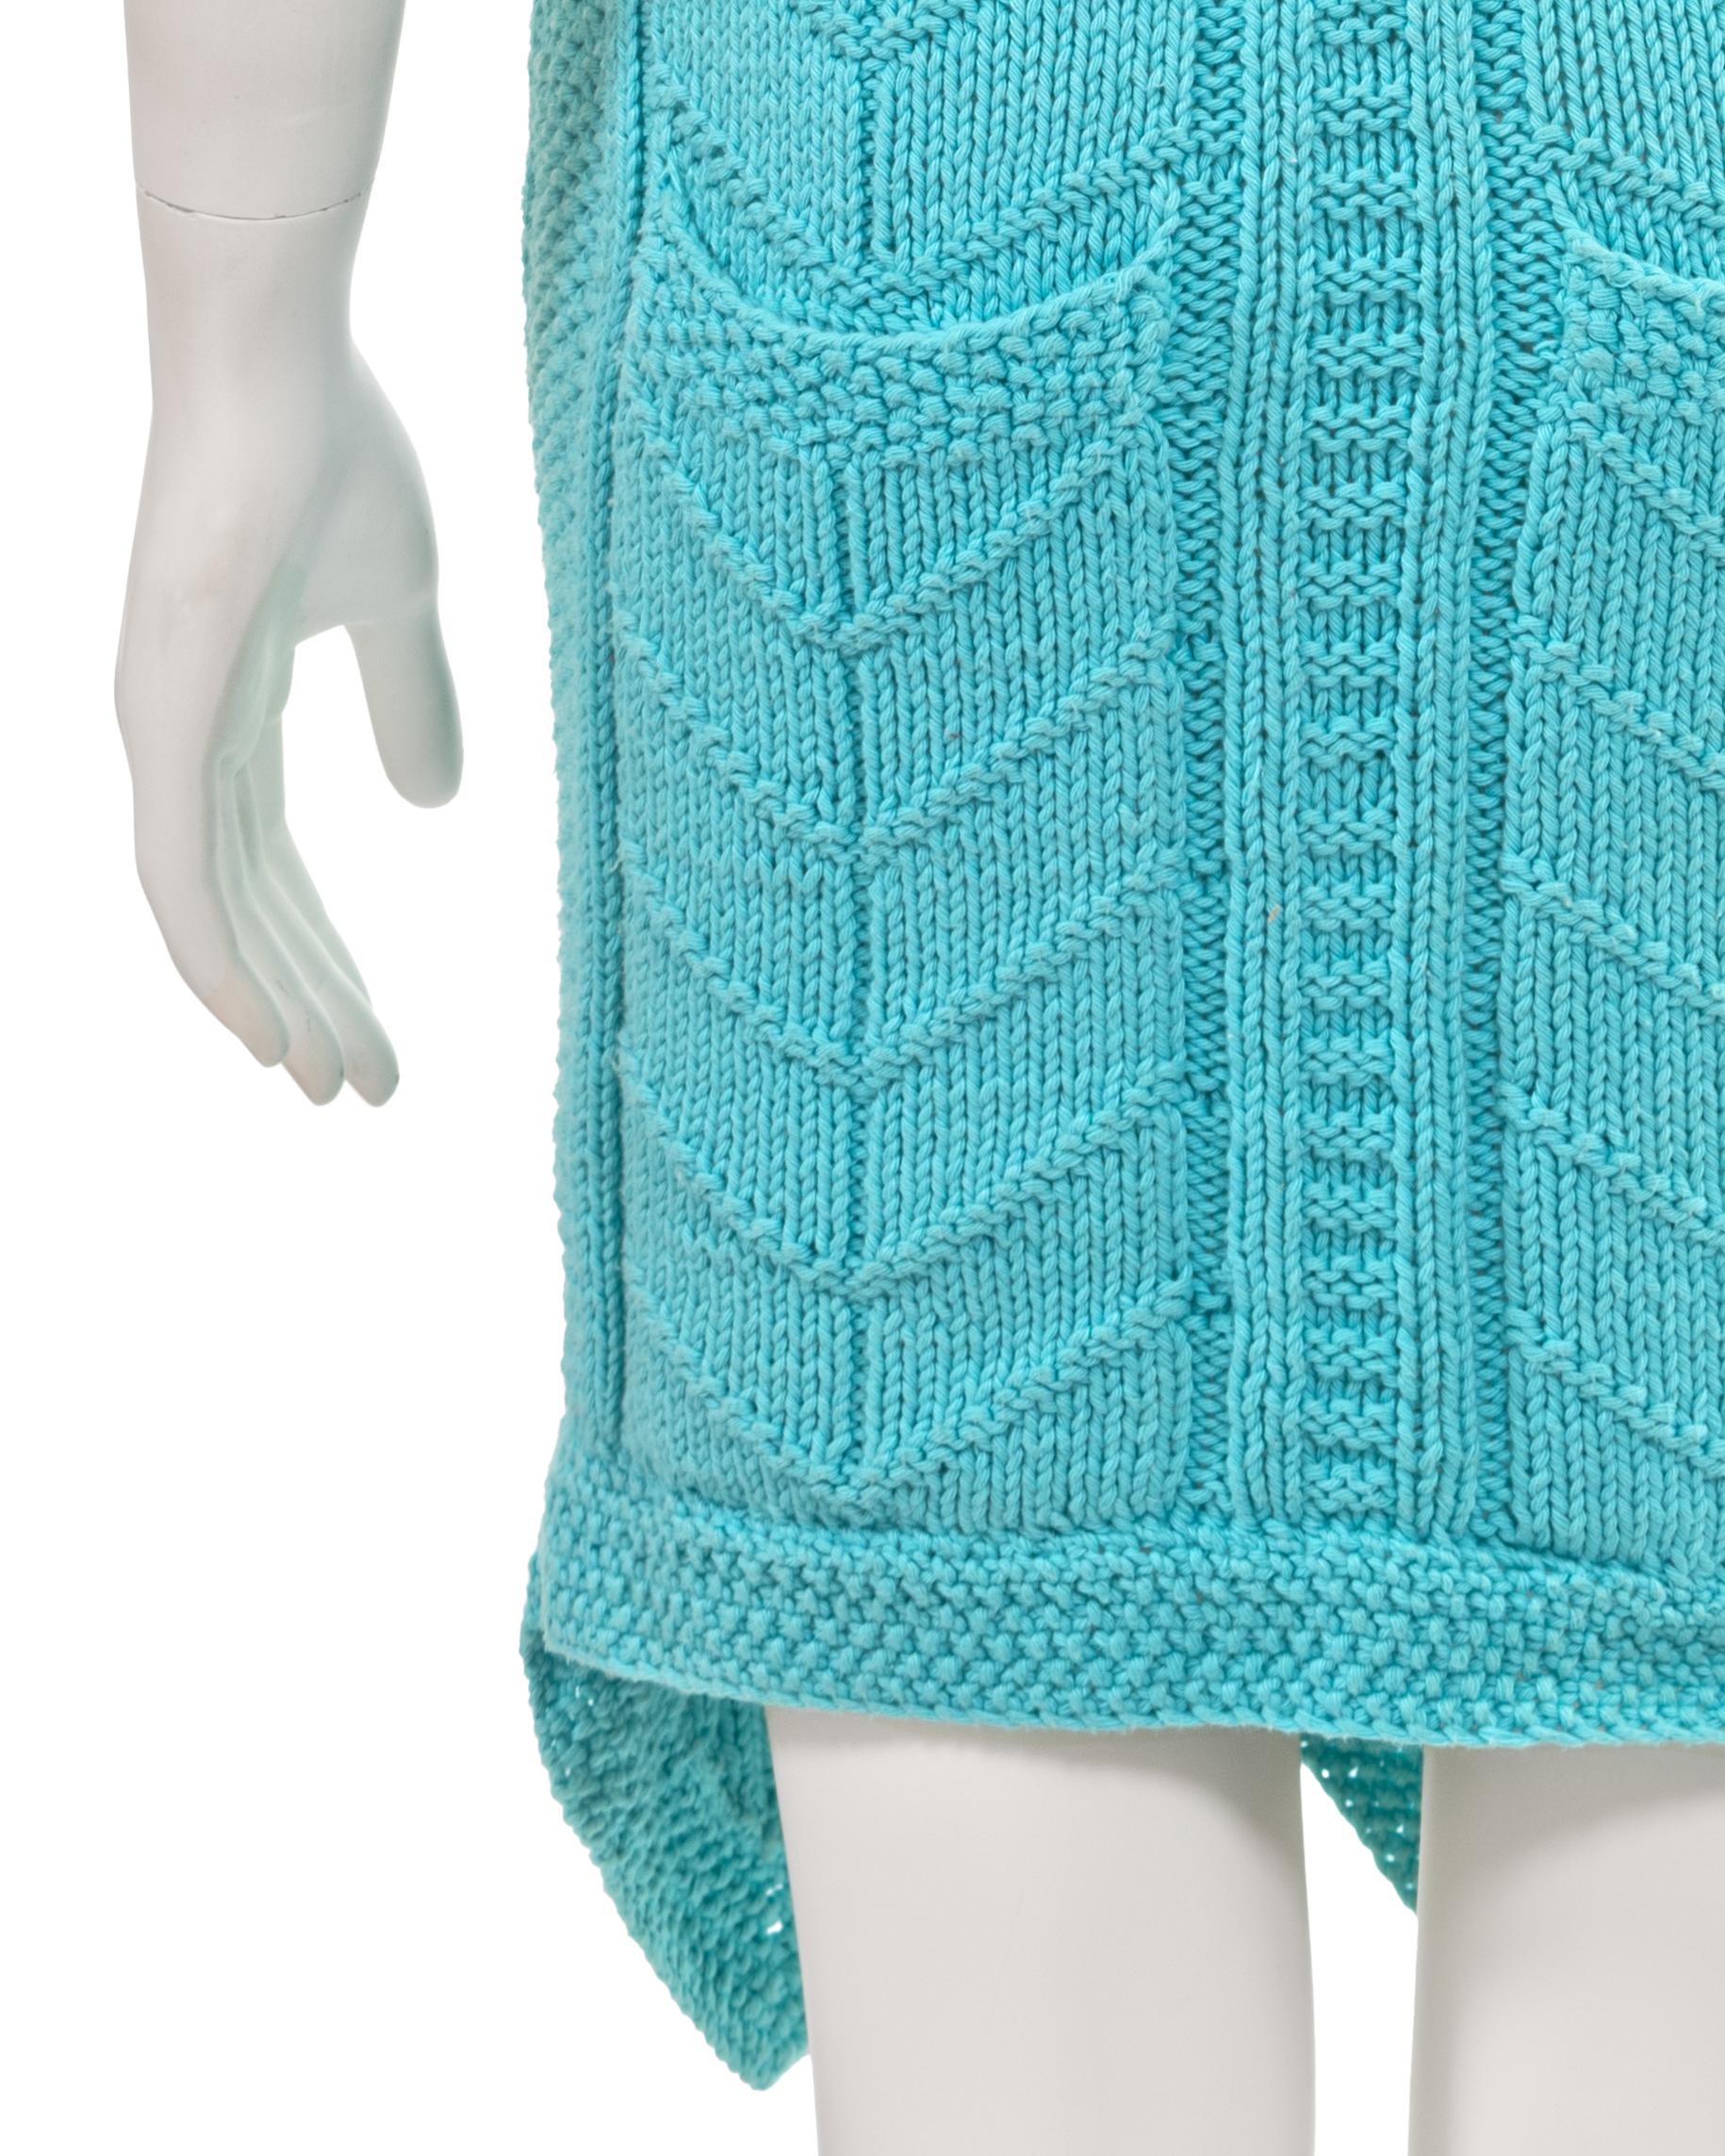 John Galliano turquoise knitted 'The Ludic Game' wine cork dress, fw 1985 For Sale 9